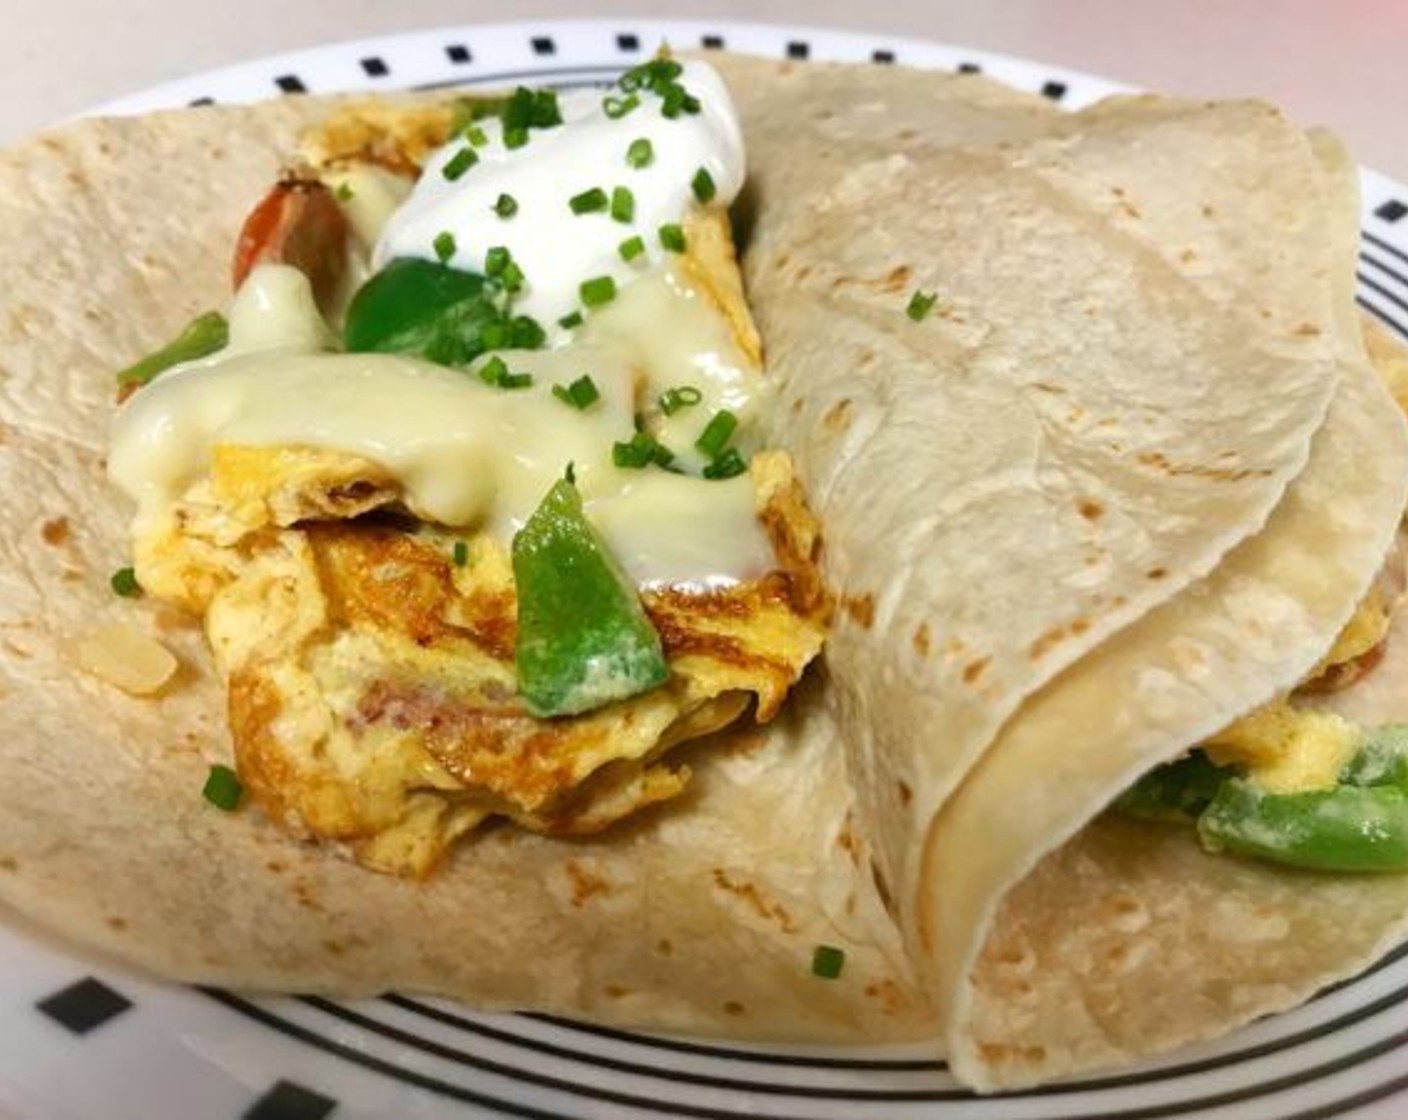 step 7 Divide eggs and place on tortillas. Top each tortilla with a tablespoon of Sour Cream (3 Tbsp) and chopped Fresh Chives (1 Tbsp).